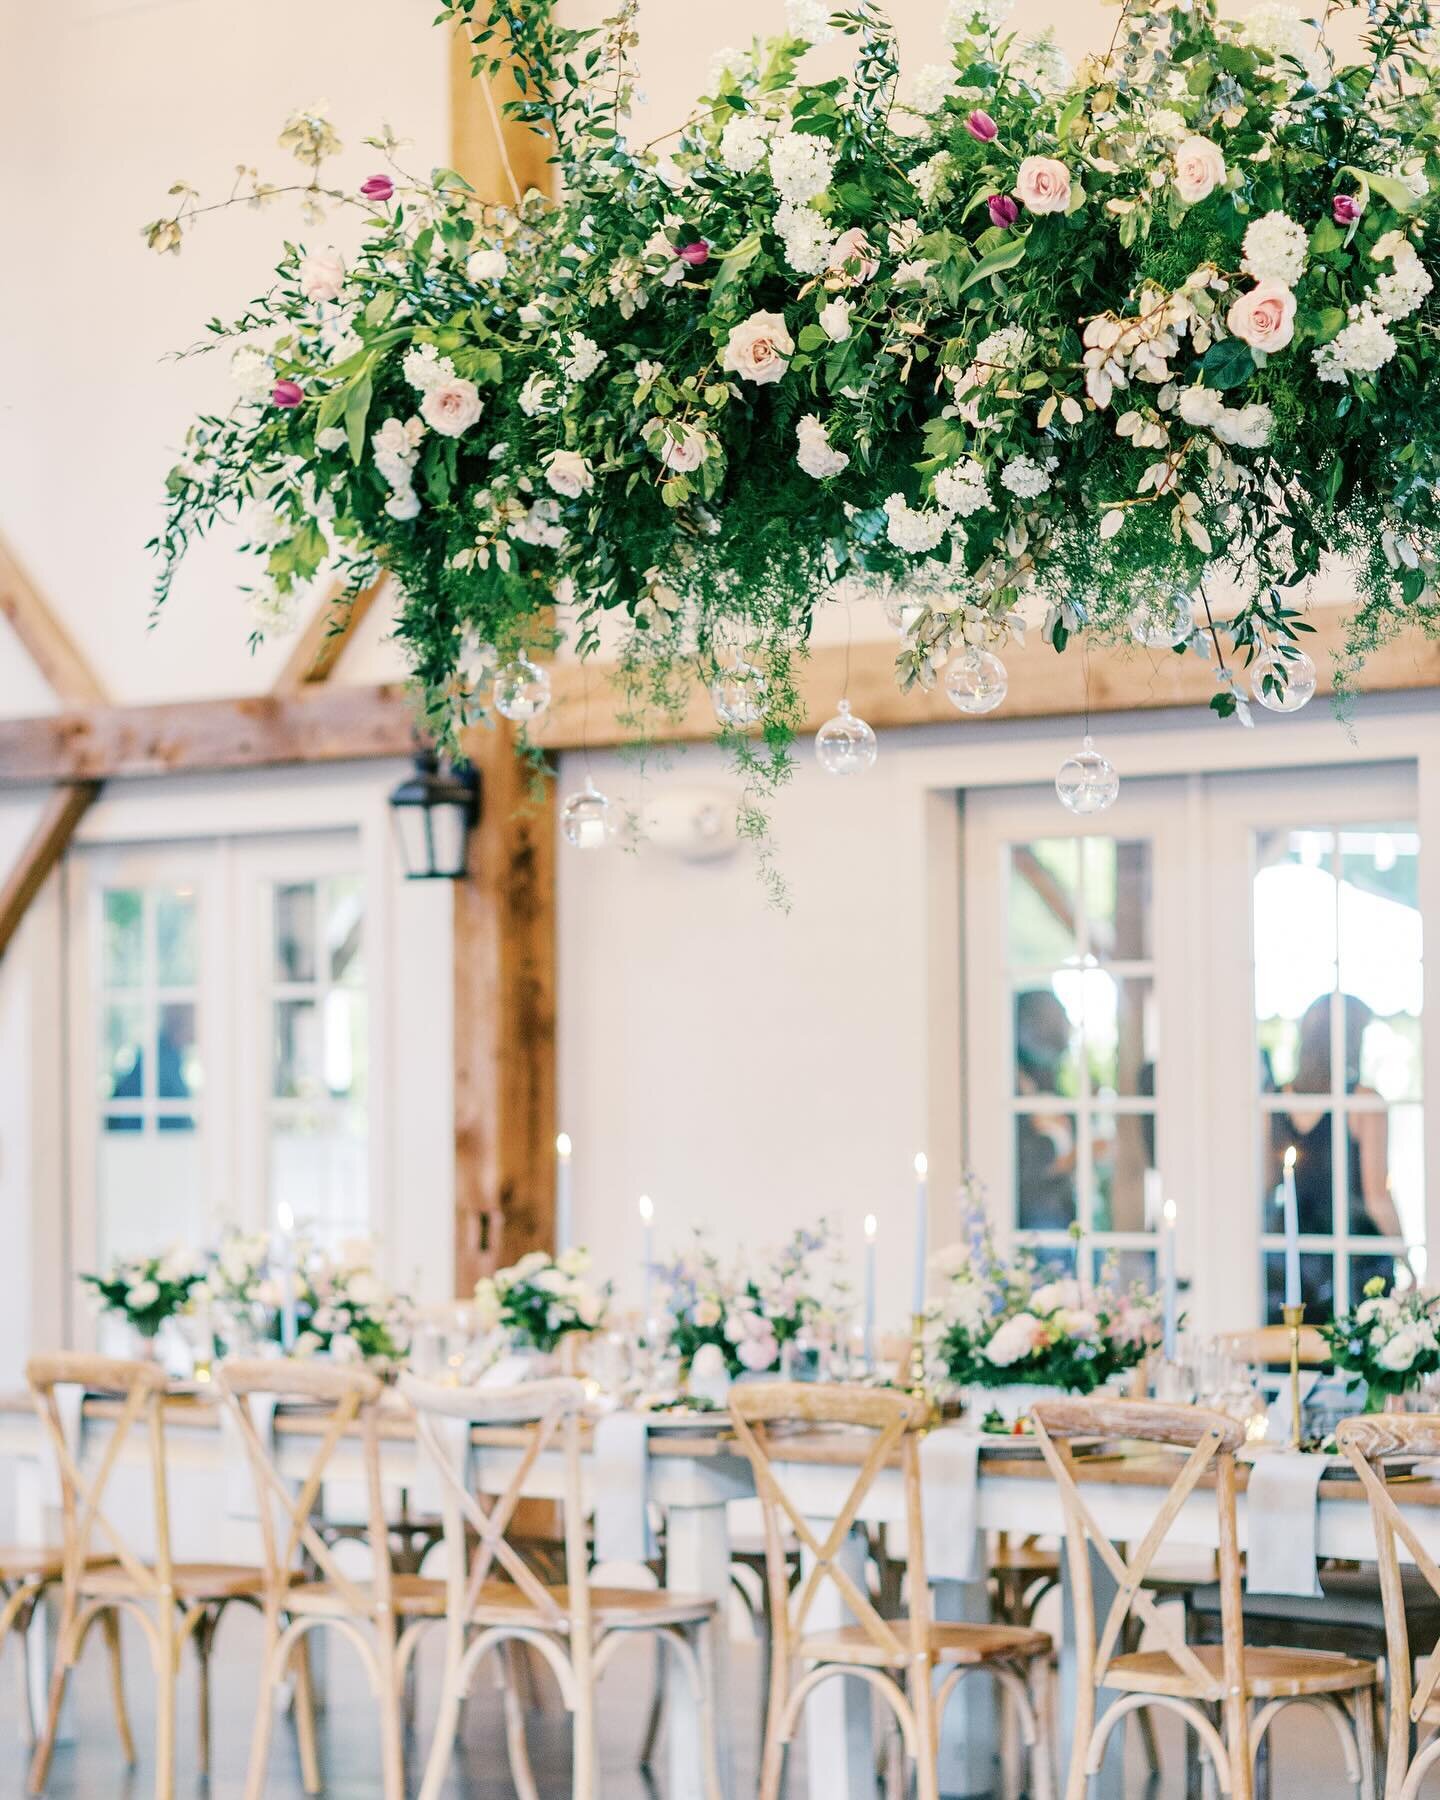 Some of the most incredibly gorgeous details ✨ this spring reception was absolutely stunning from top to bottom 🌸🤍✨

Floral Design @wildfloraflowers
Photography @annietimmonsphotography 
Planning + Design @kasteventsandco 
Speciality Lighting @getl